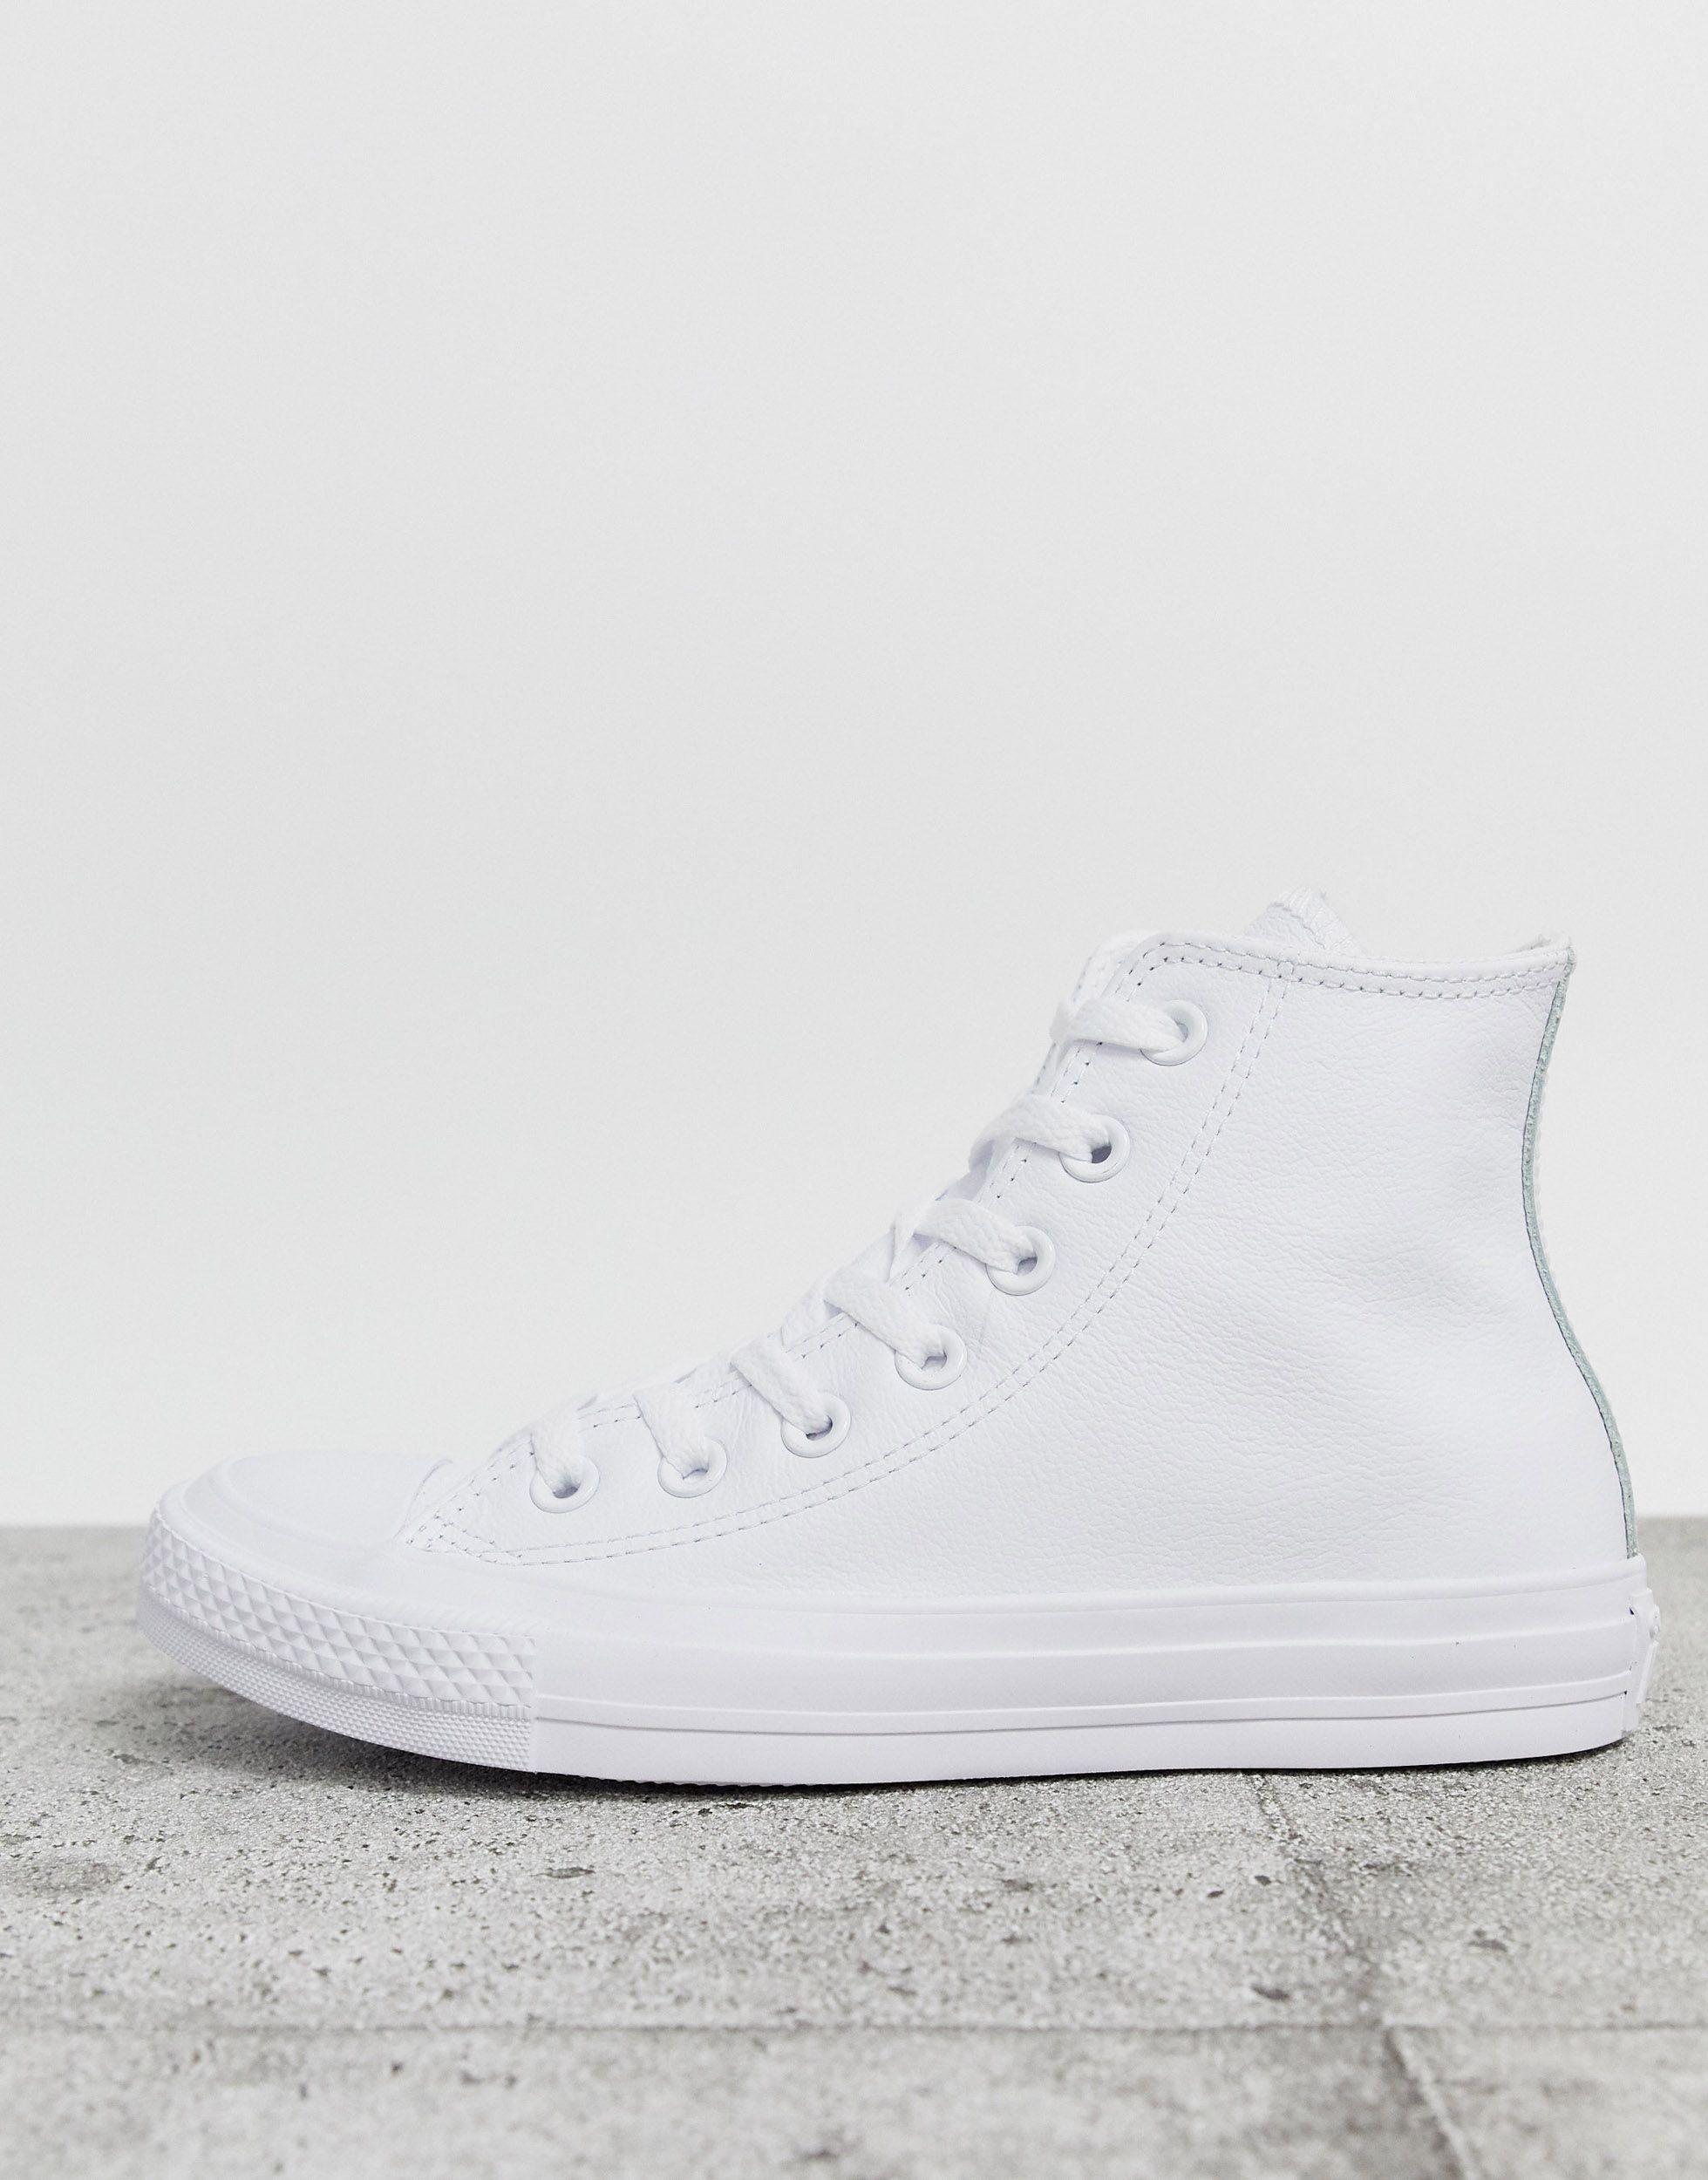 Converse Chuck Taylor Hi Leather White Monochrome Trainers | Lyst تيتانك